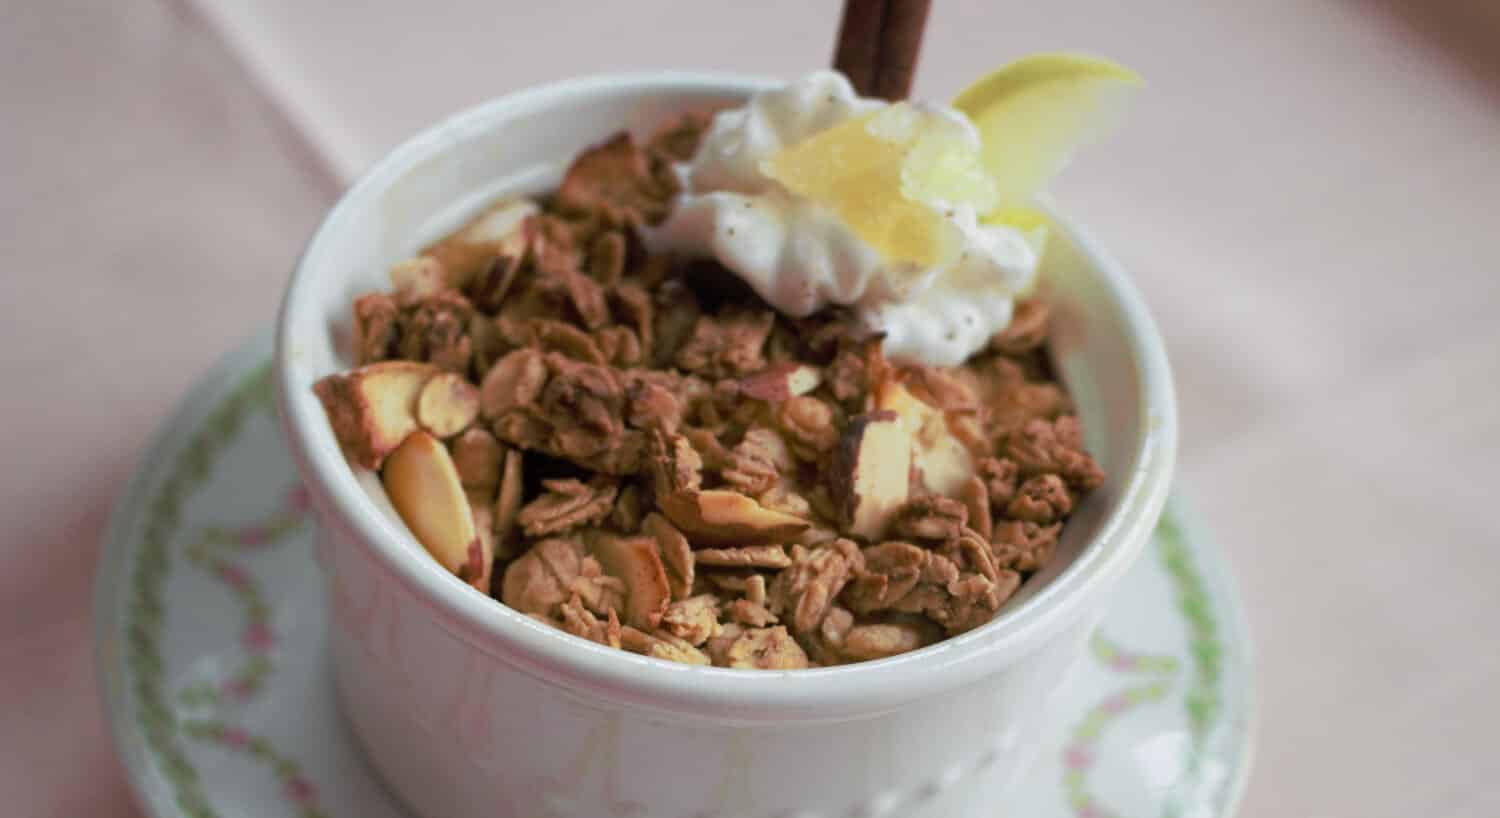 Home made granola in a white bowl with cream on top